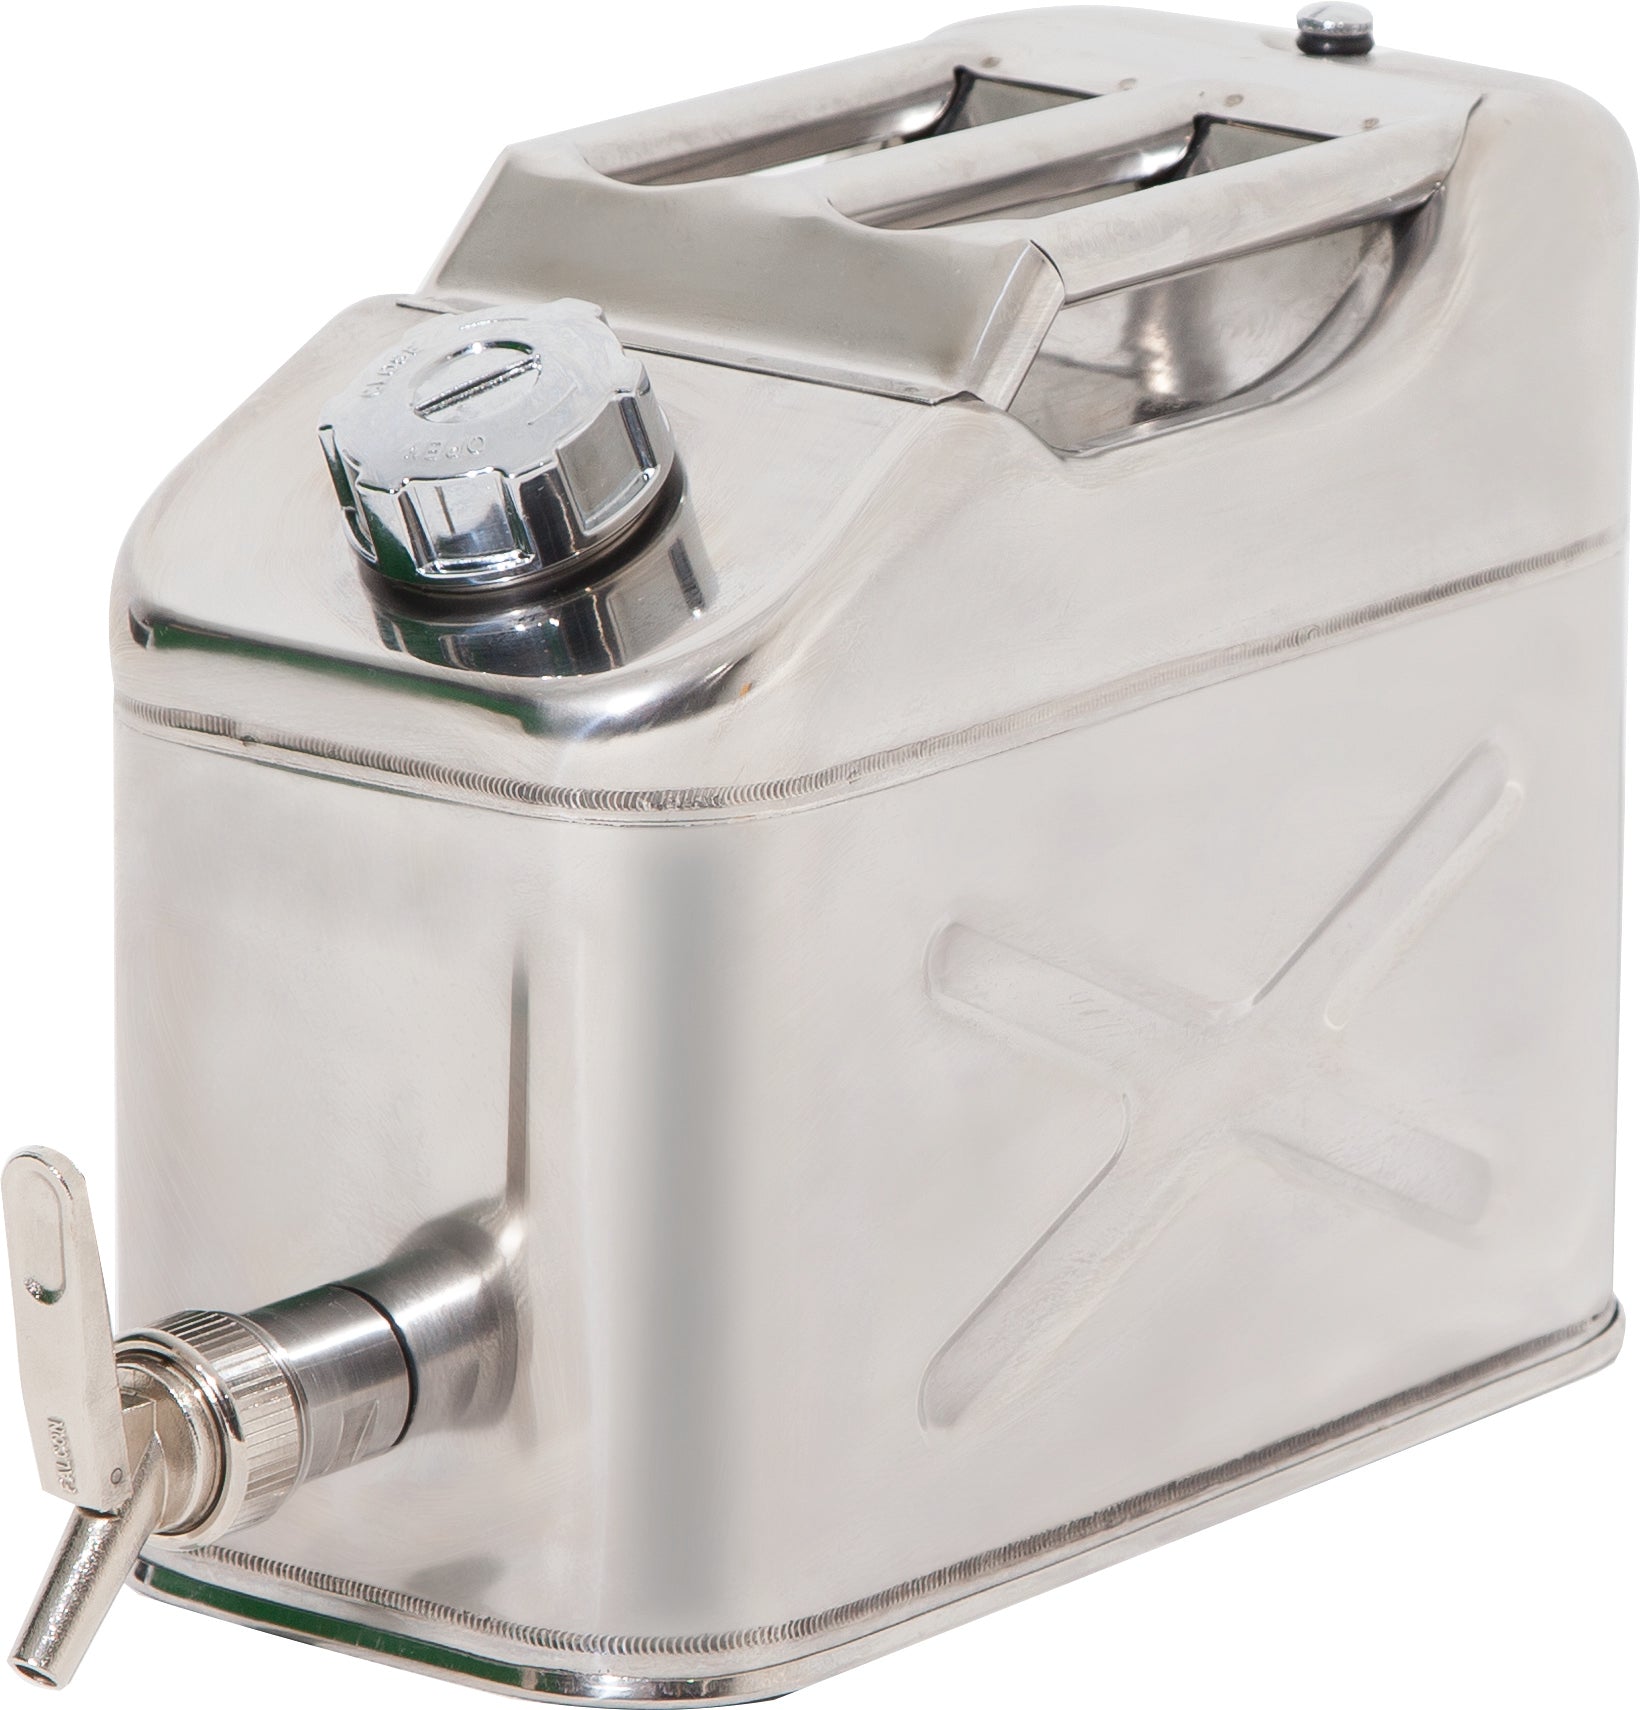 Safety canister st.steel 1.4301, 10 L, stainless steel 1.431 polished